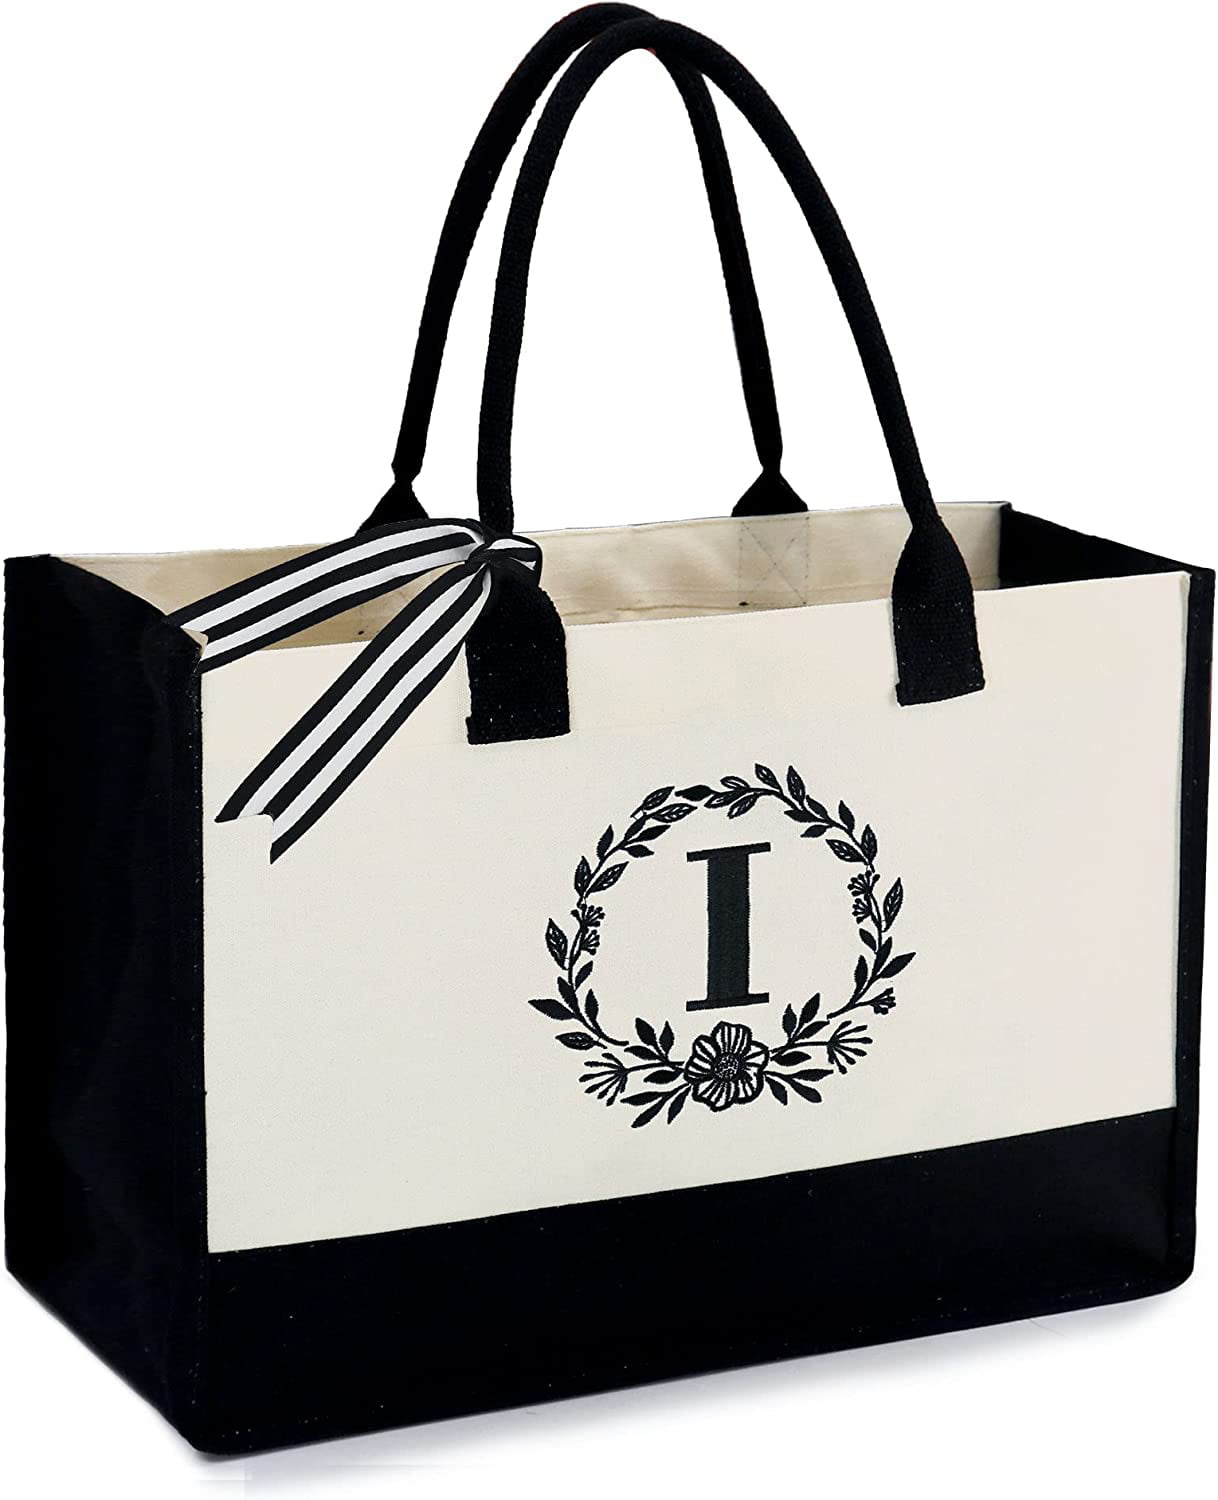 Personalized Initial Canvas Tote Bag with Zipper Pocket 13OZ